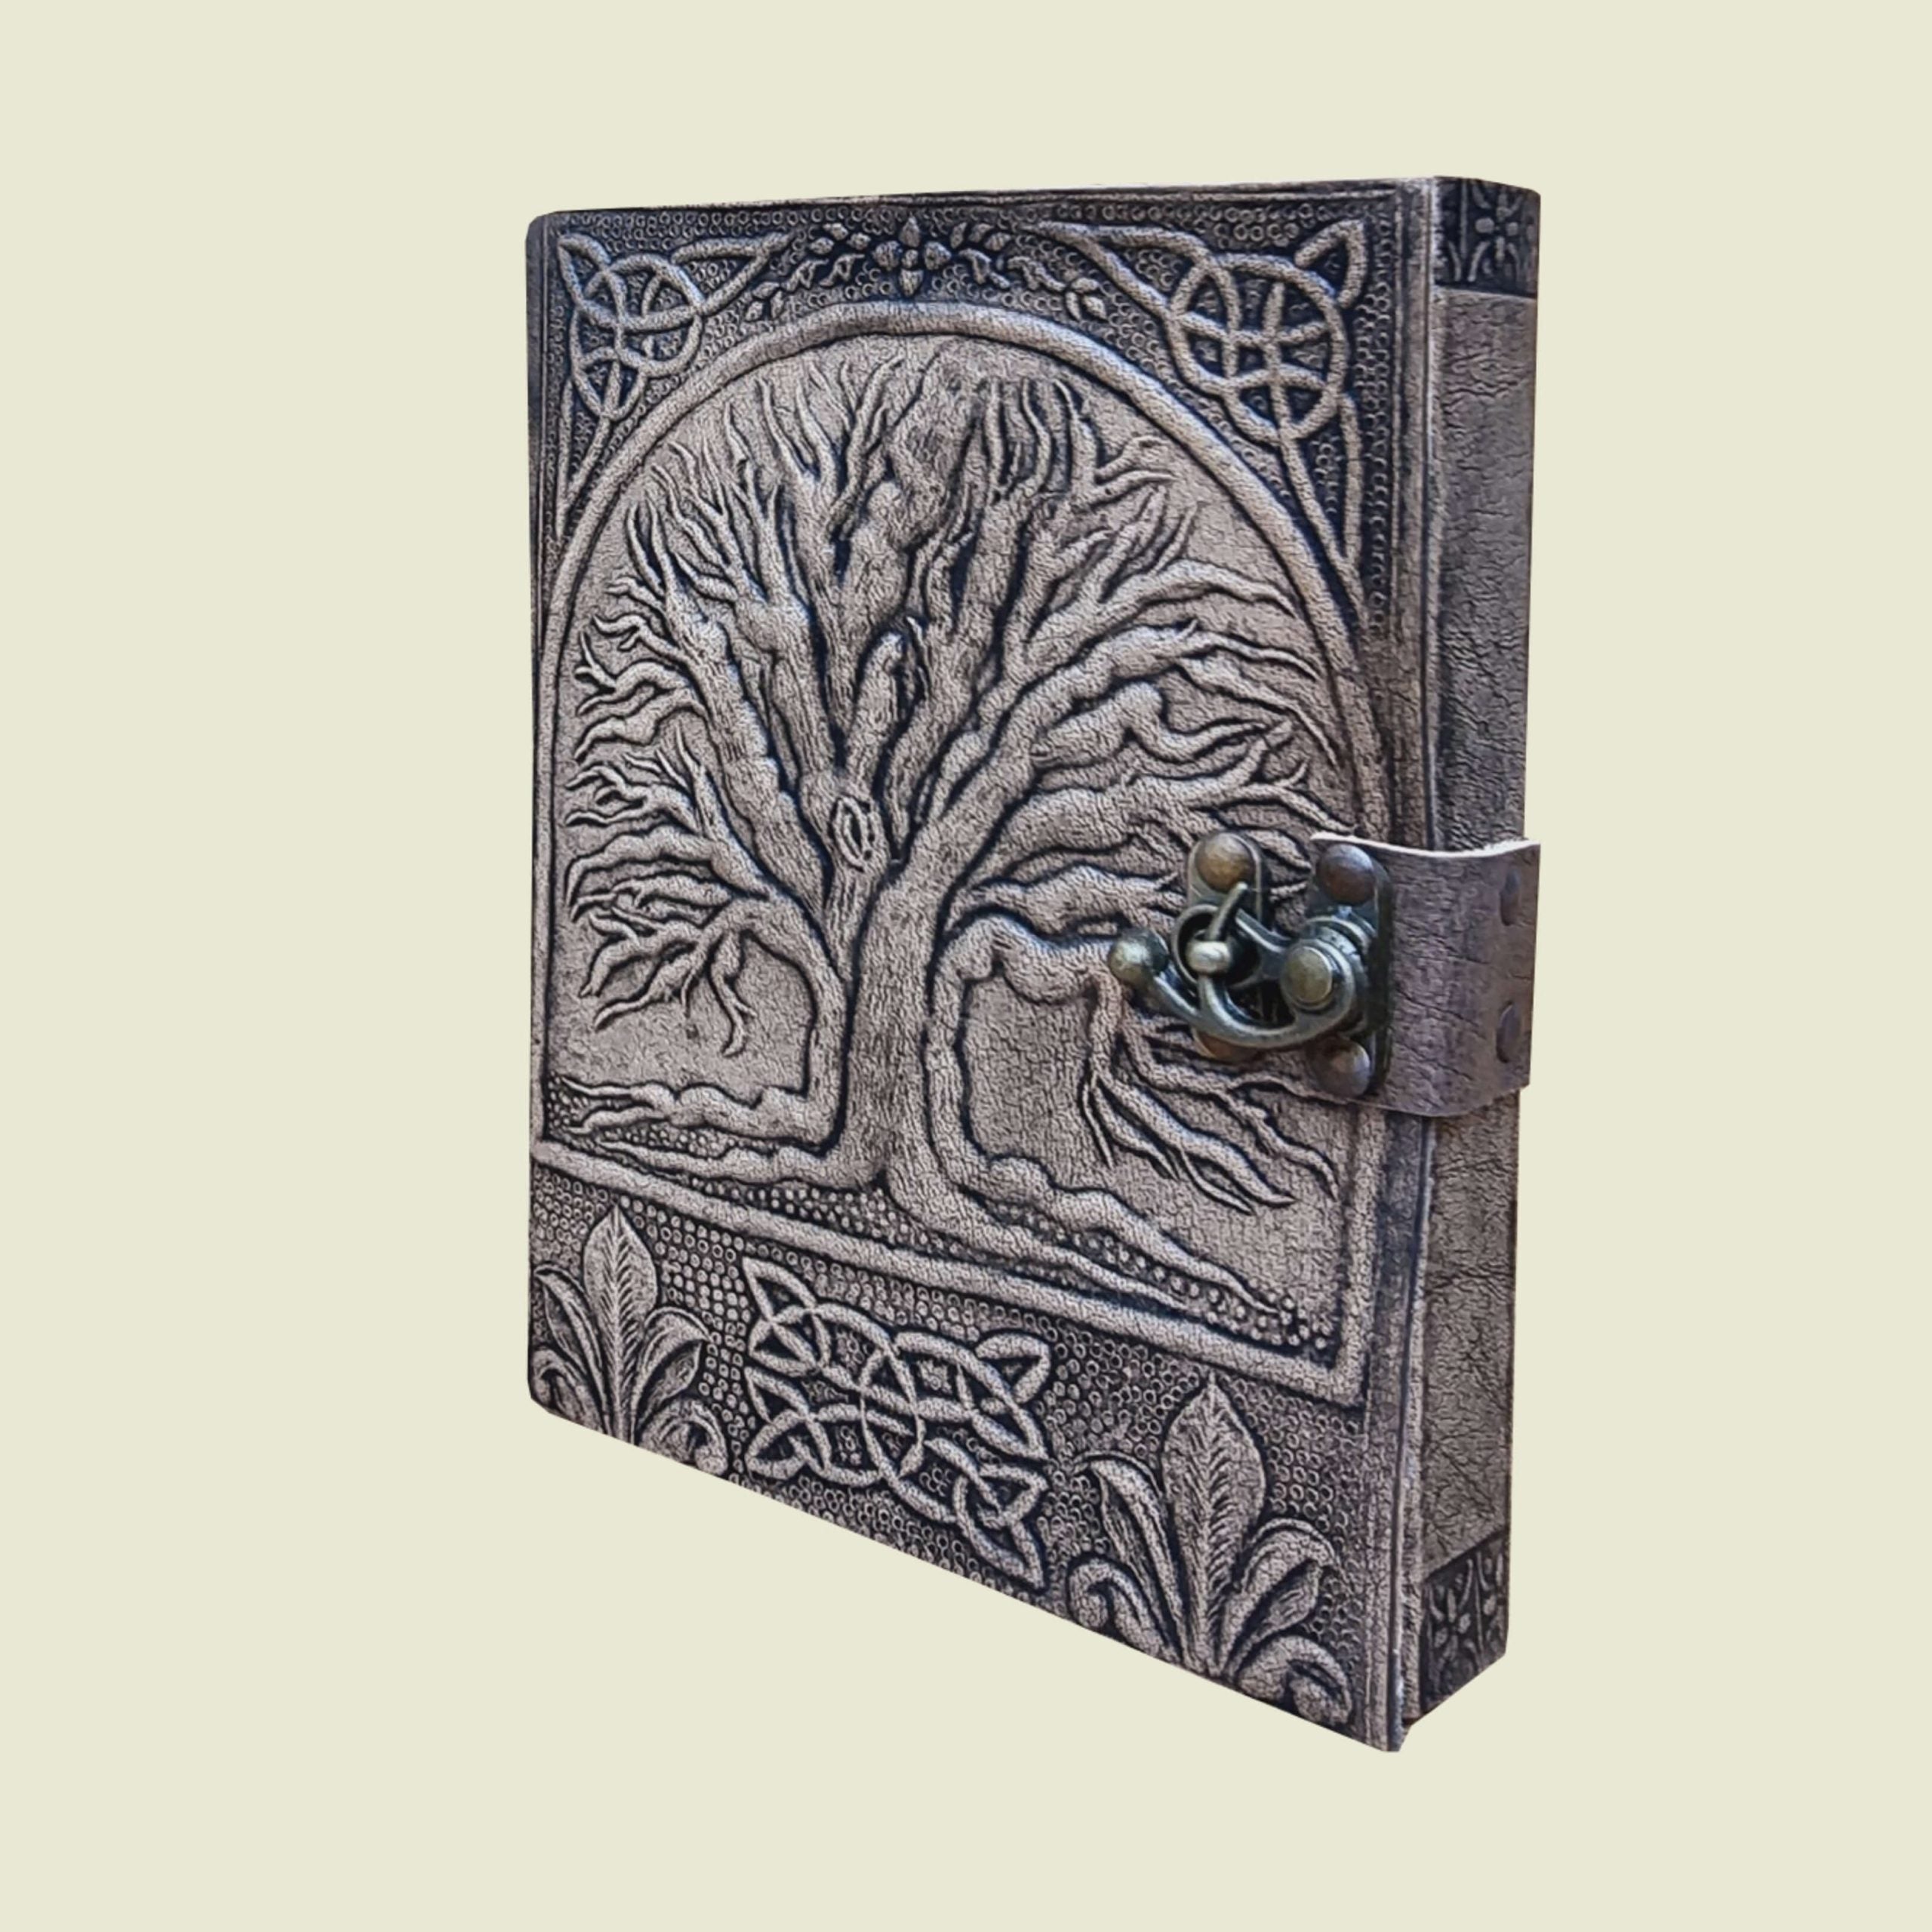 Earth Journal -Tree of Life 100% Leather, Antique Finish Medium